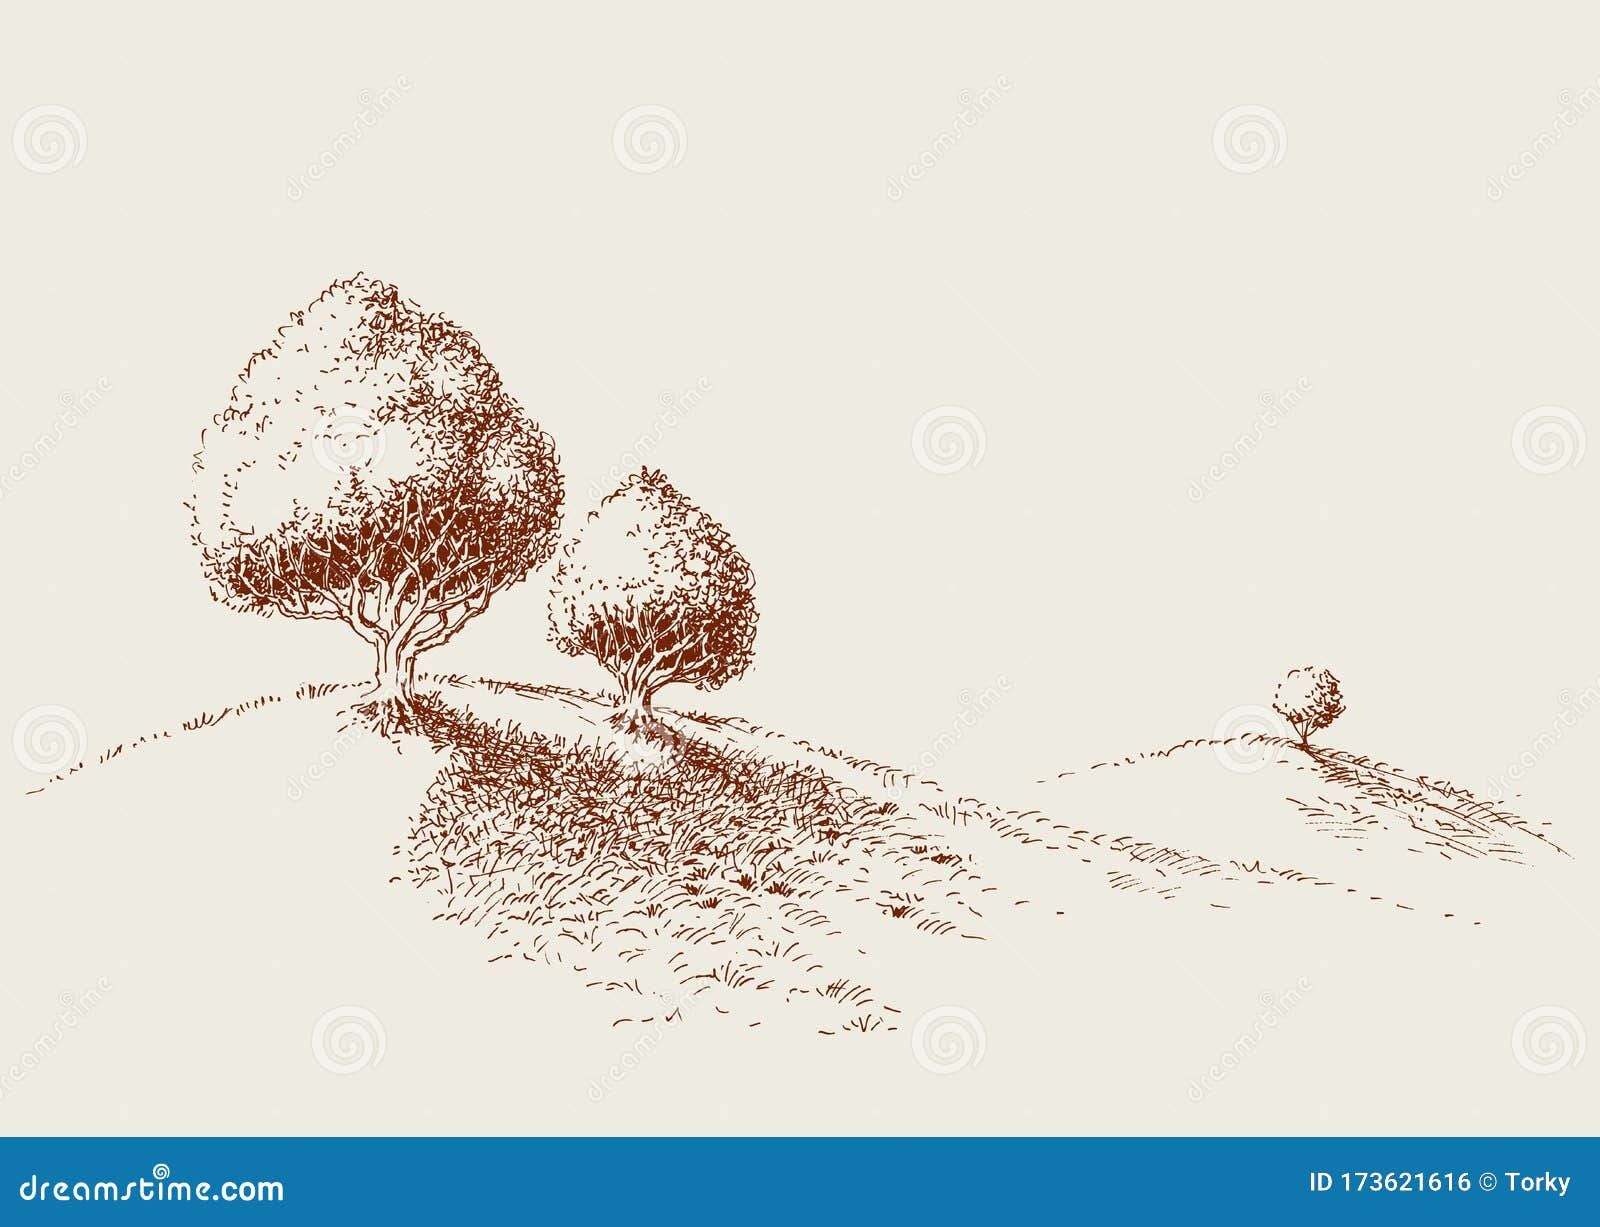 Quiet Place in Nature Wallpaper Stock Vector - Illustration of drawing,  design: 173621616